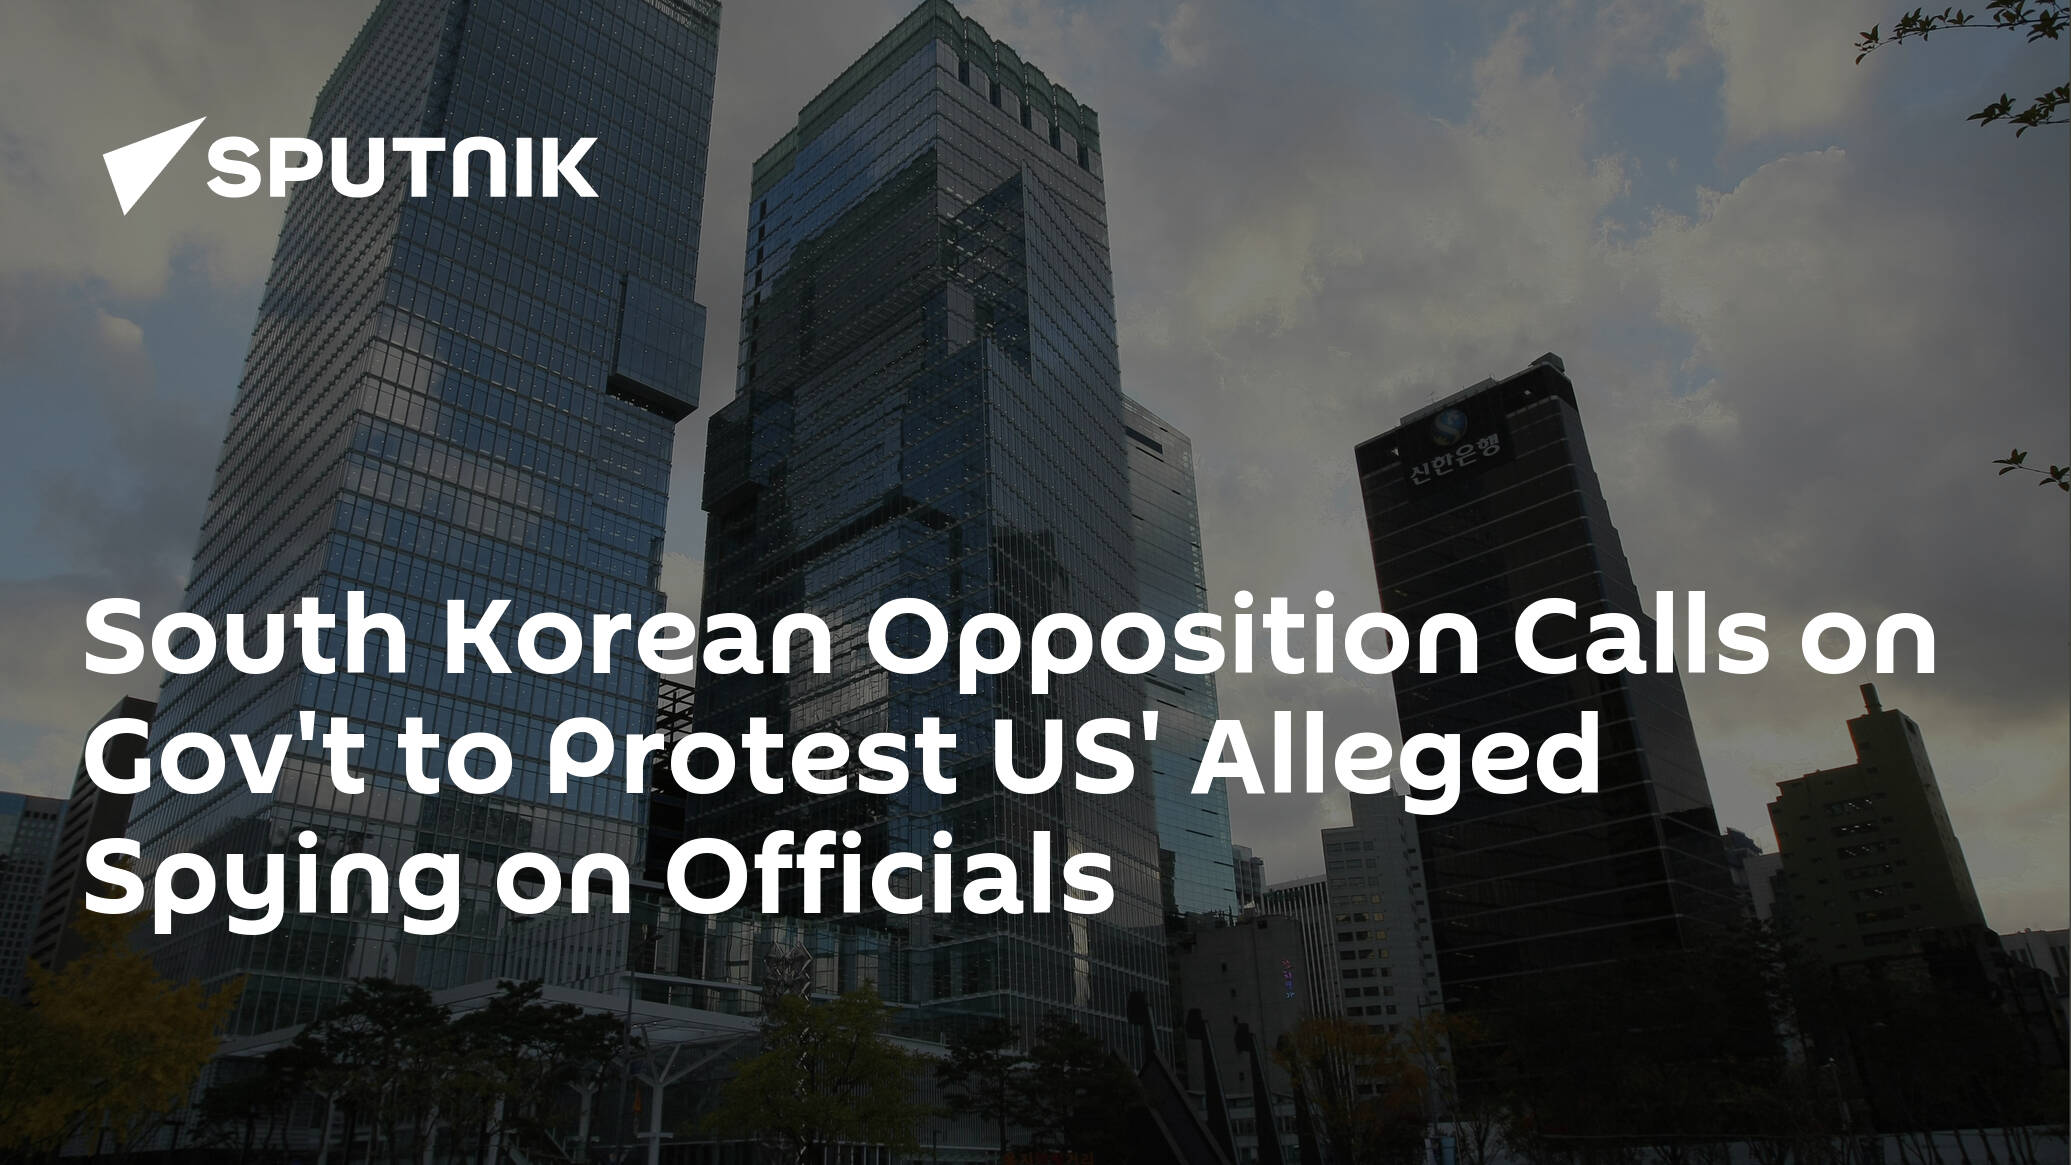 South Korean Opposition Calls on Gov't to Protest US' Alleged Spying on Officials